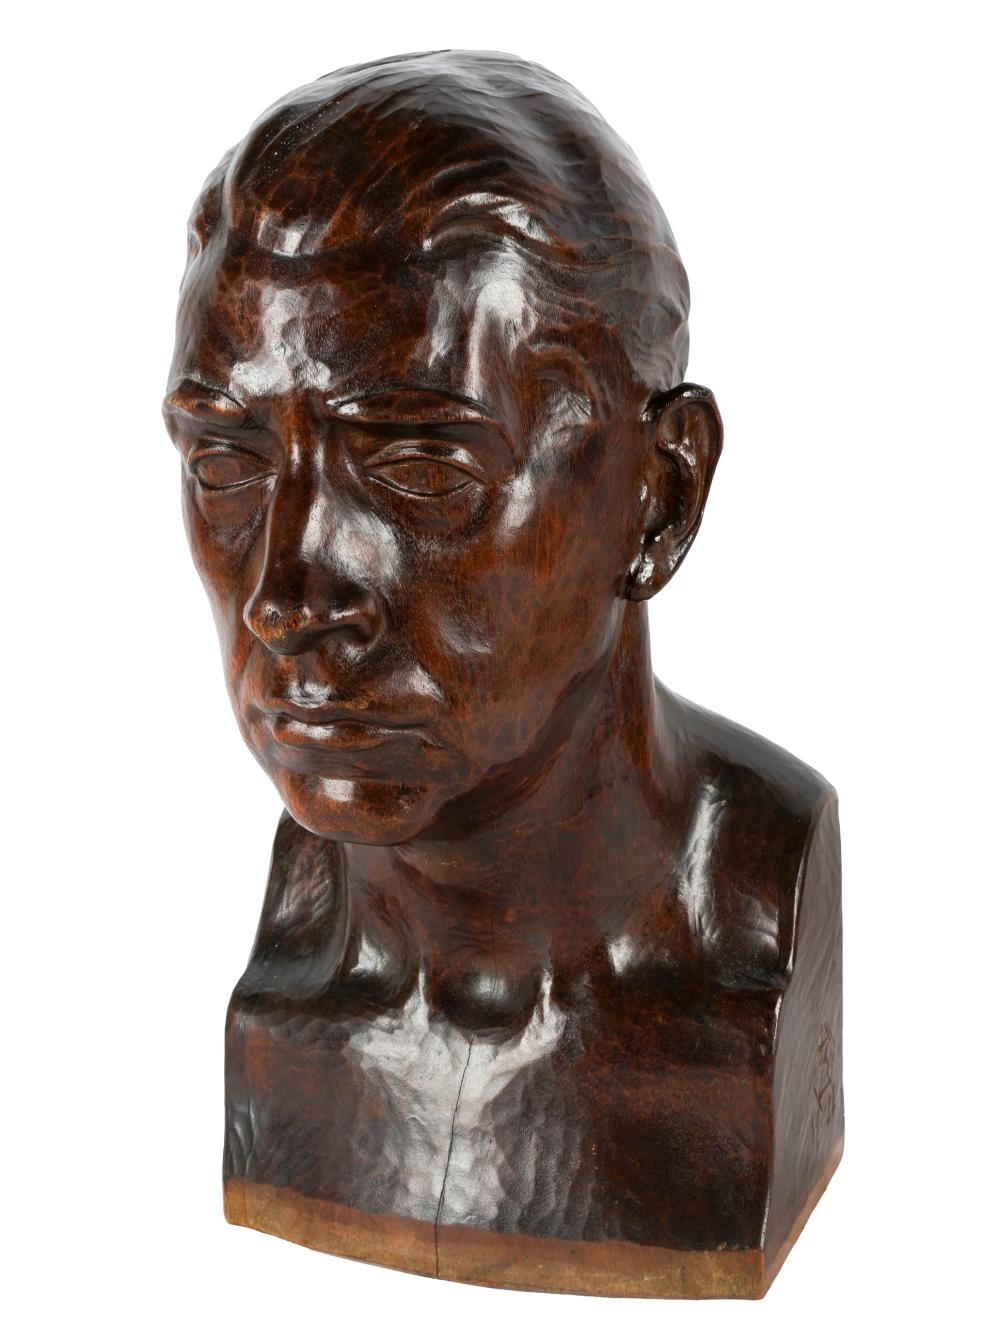 20TH CENTURY: HEAD OF A MANcarved wood;